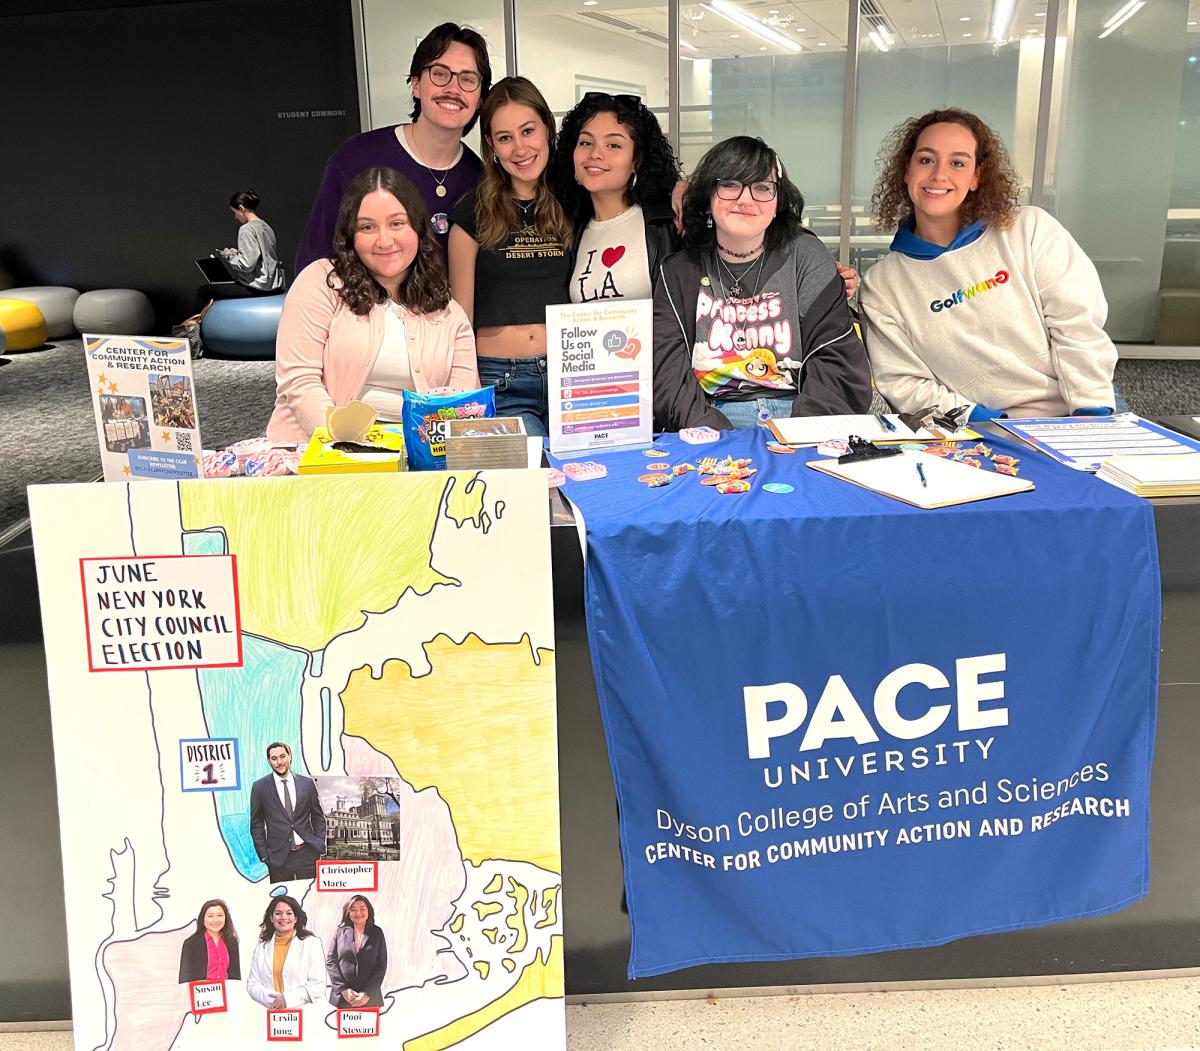 Several students at a table with Center for Community Action and Research materials and a poster of the June City Council Election.